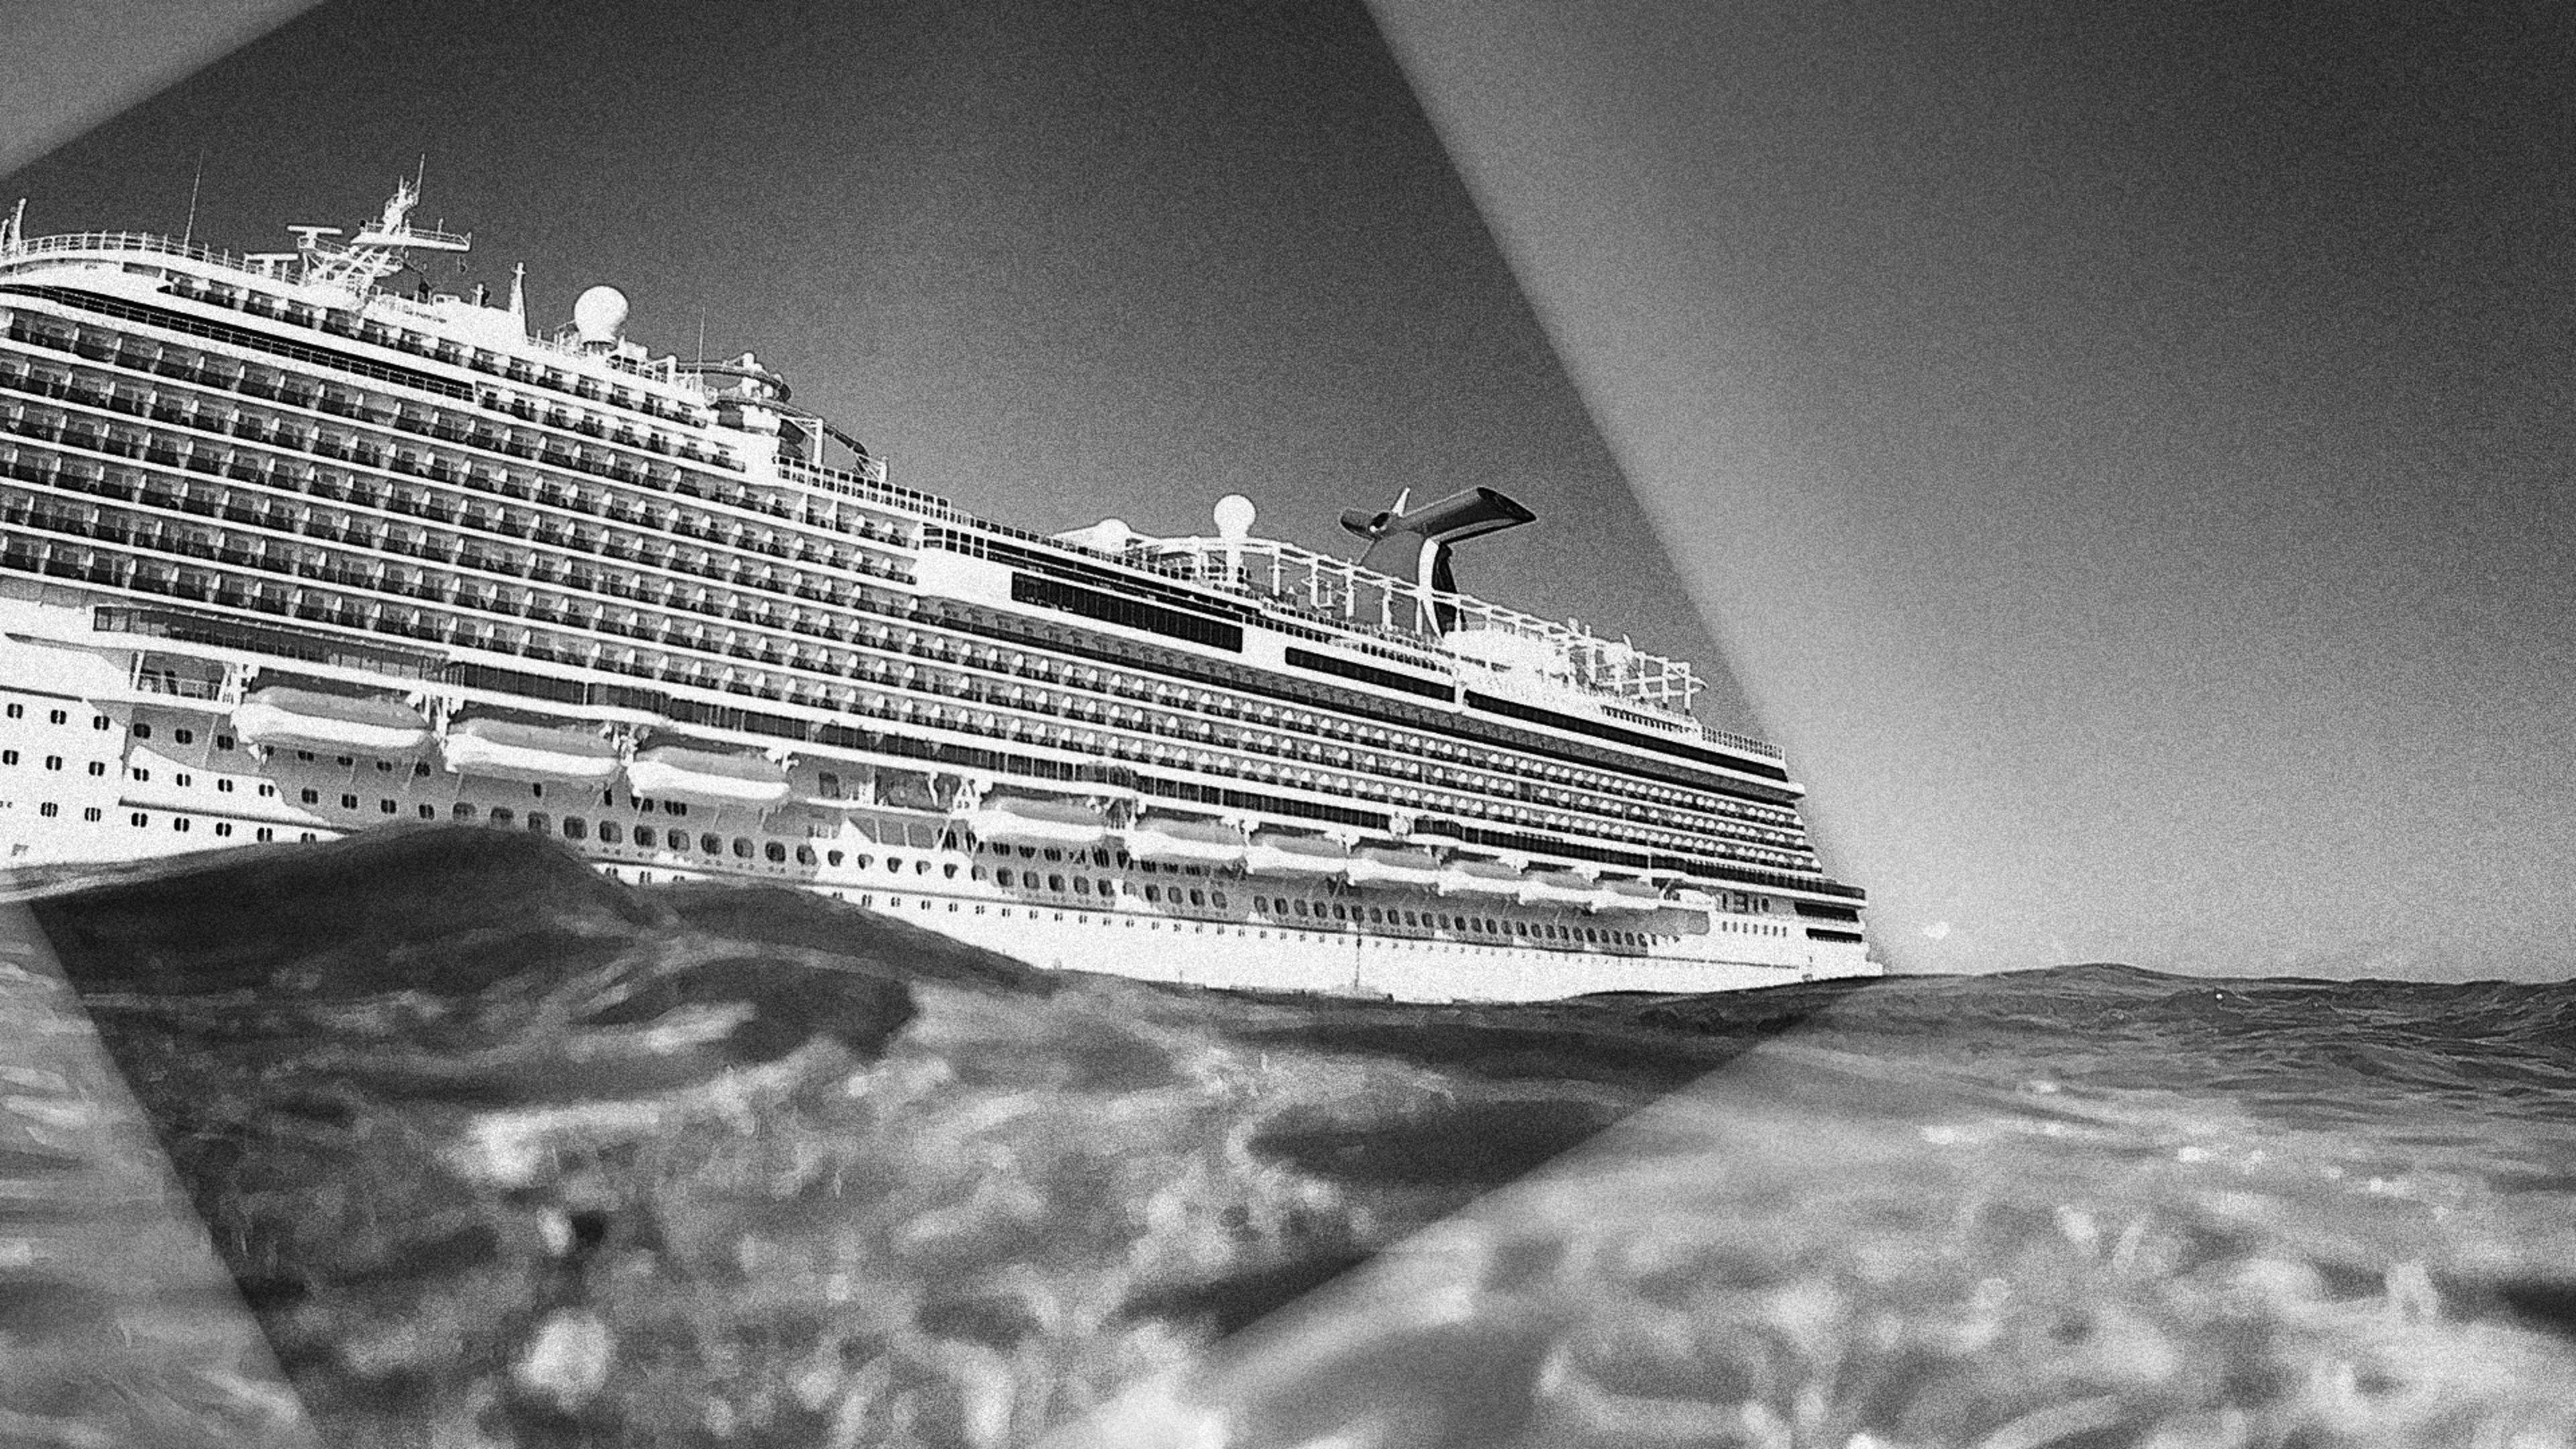 Carnival’s Princess Cruises line just cancelled all voyages for the next two months due to coronavirus